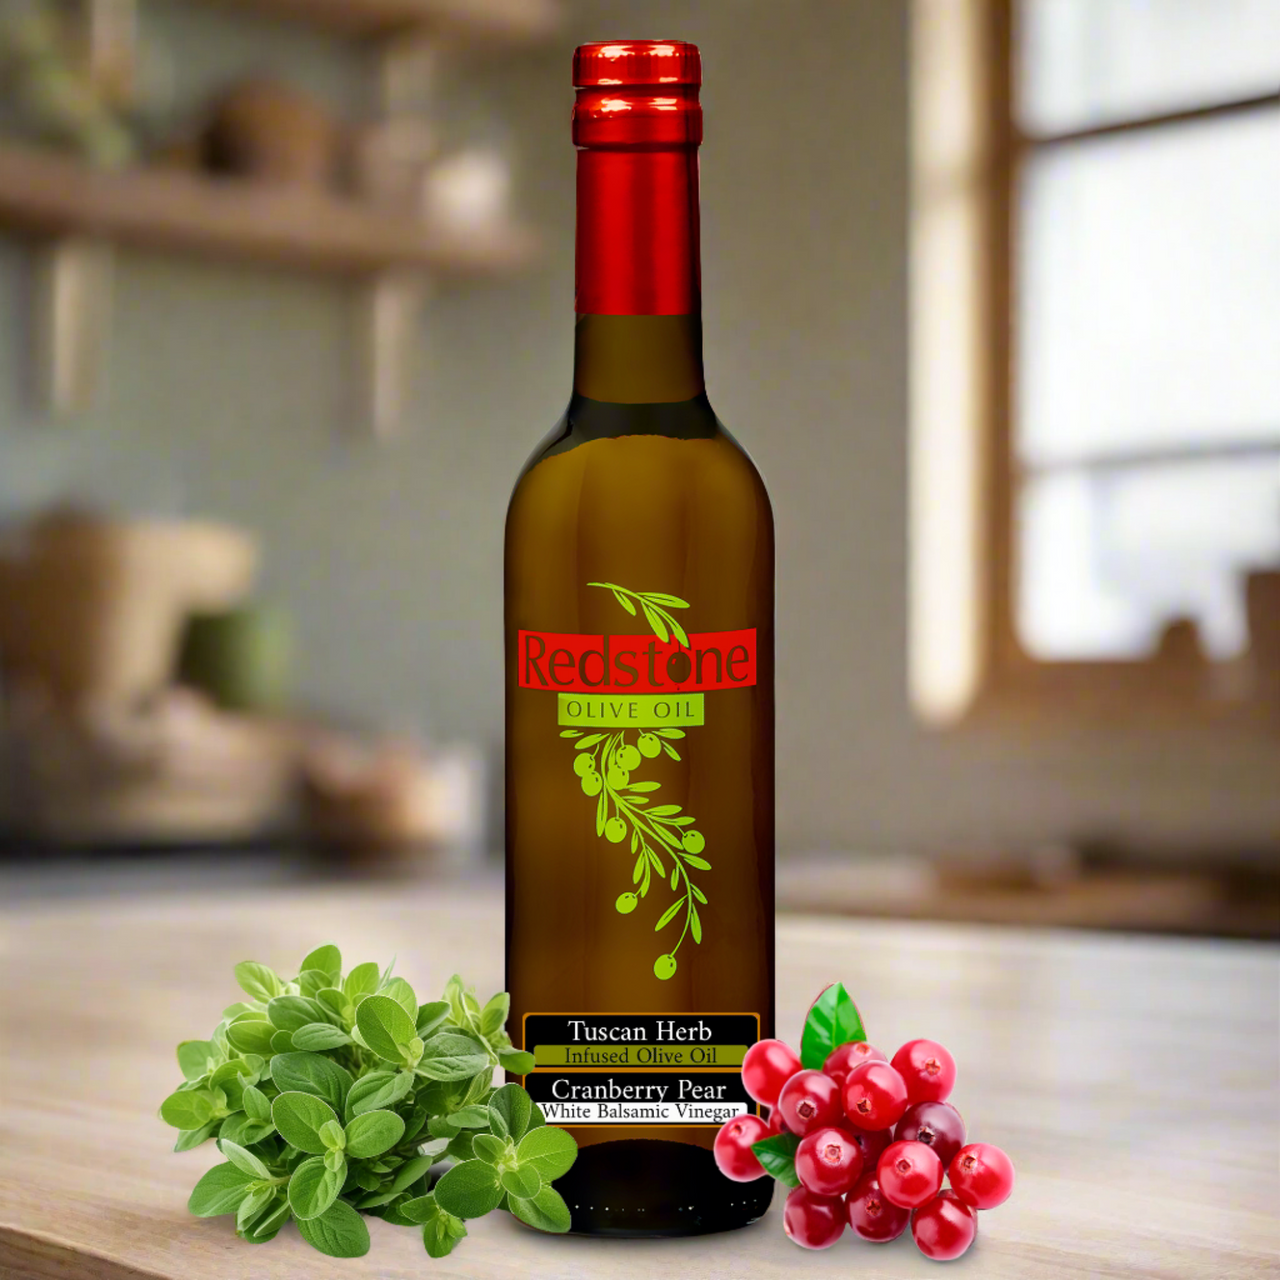 Tuscan Herb Olive Oil and Cranberry Pear White Balsamic